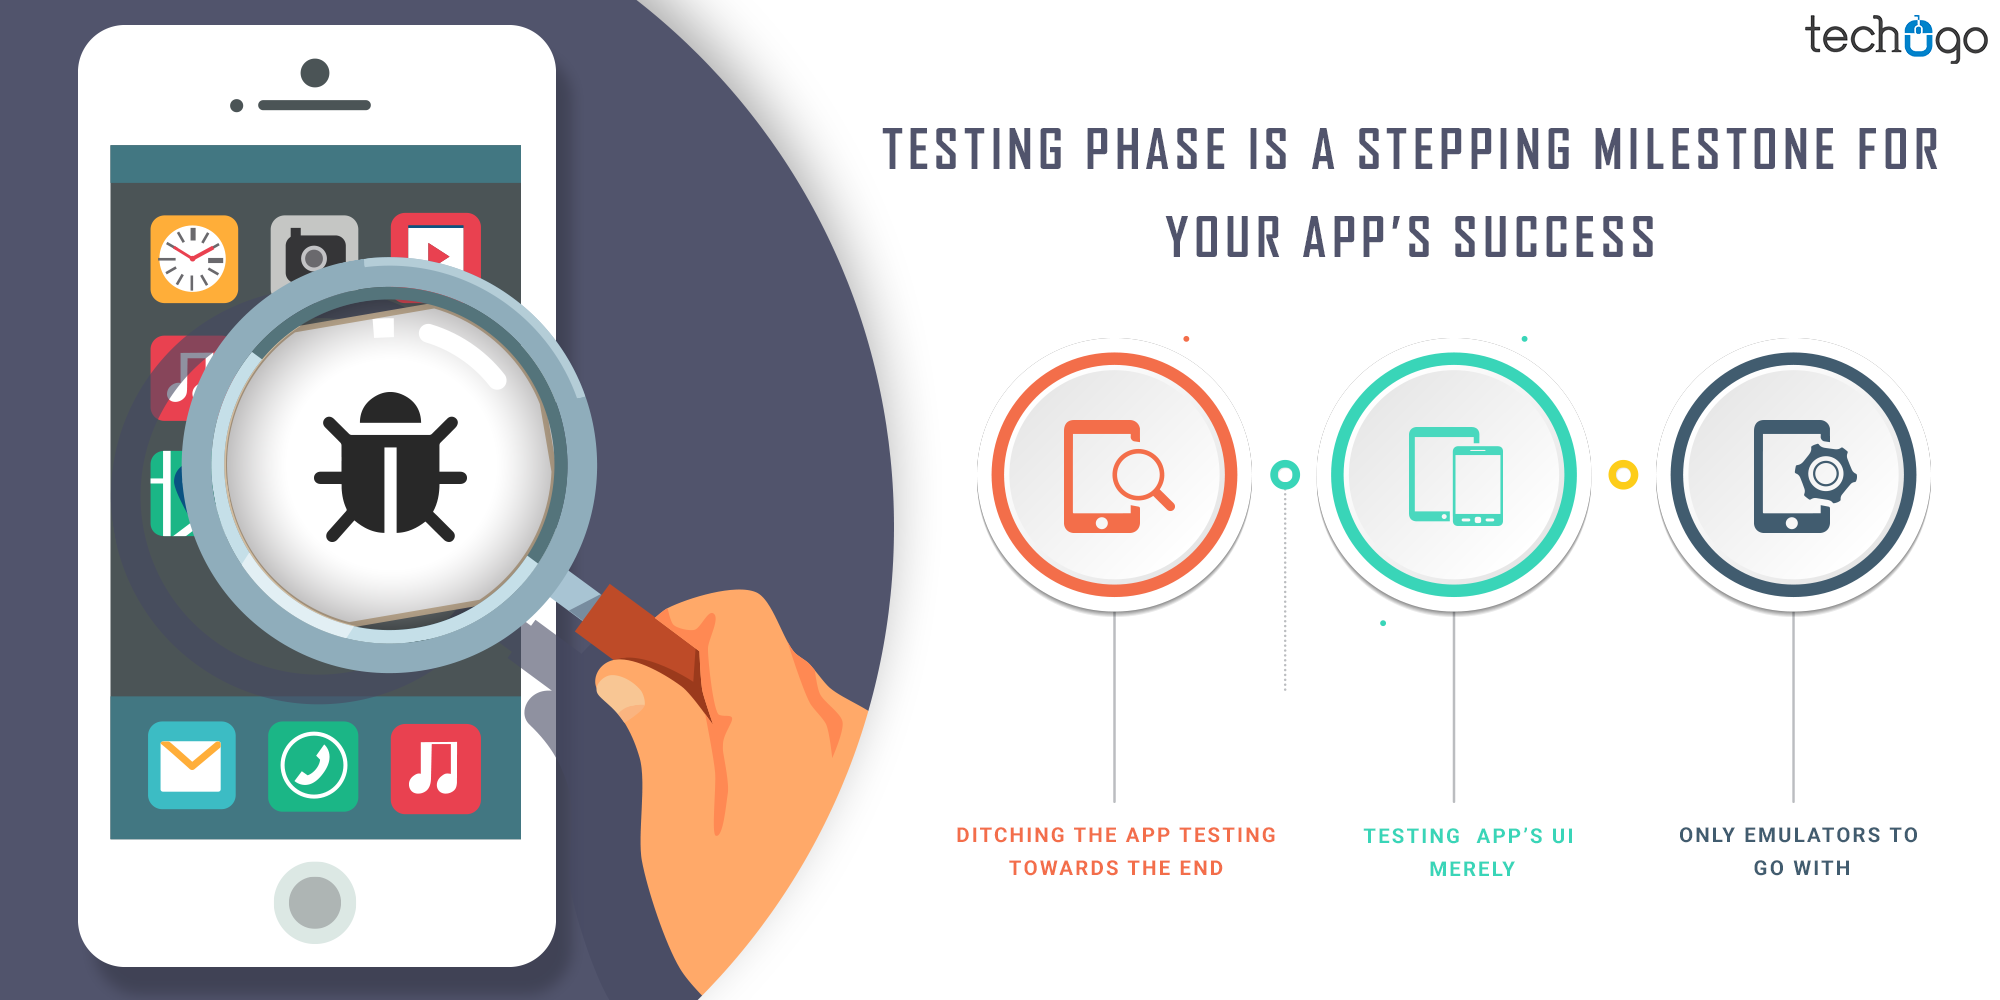 Testing Phase Is A Stepping Milestone For Your App’s Success